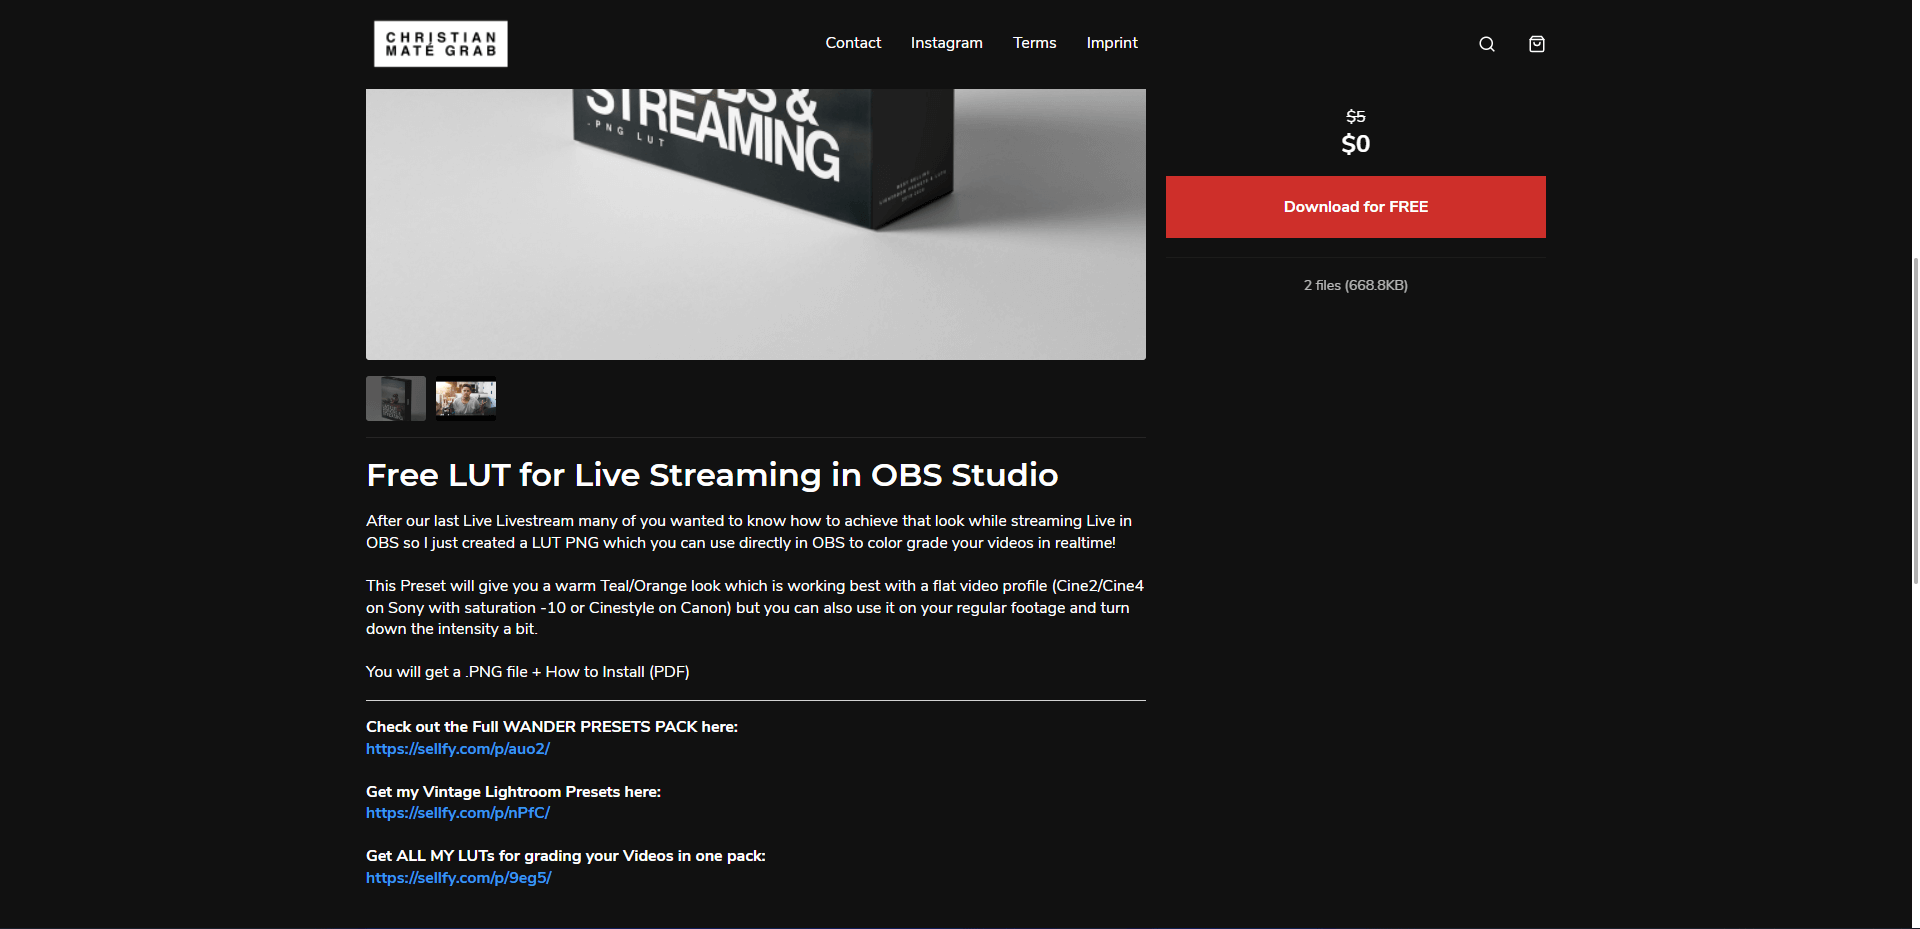 obs lut pack